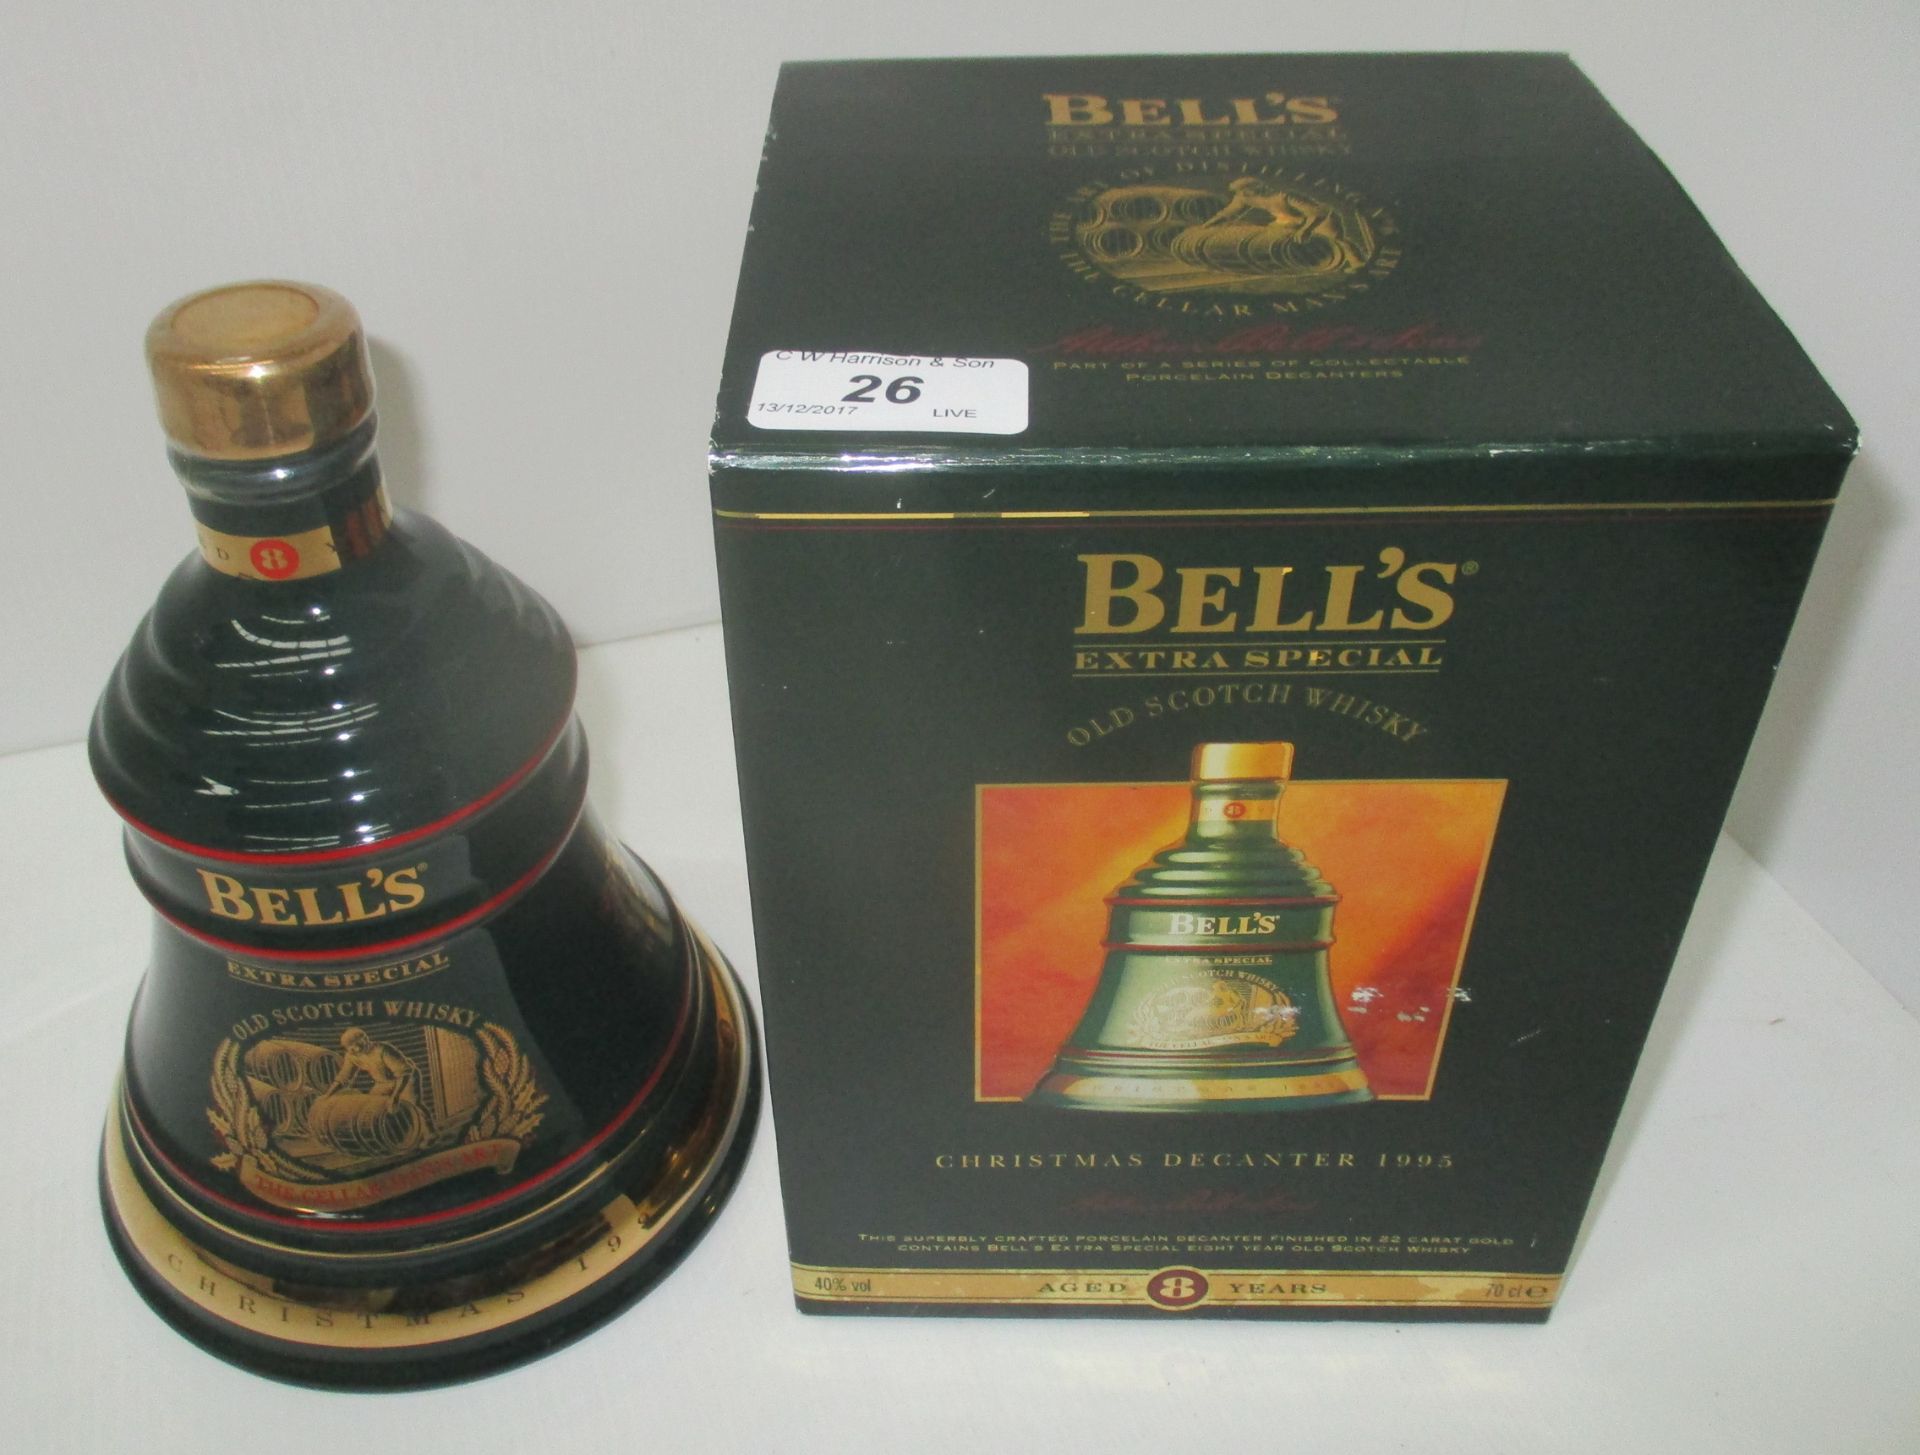 A 70cl Wade porcelain decanter containing Bell's Extra Special Old Scotch Whisky for Christmas 1995